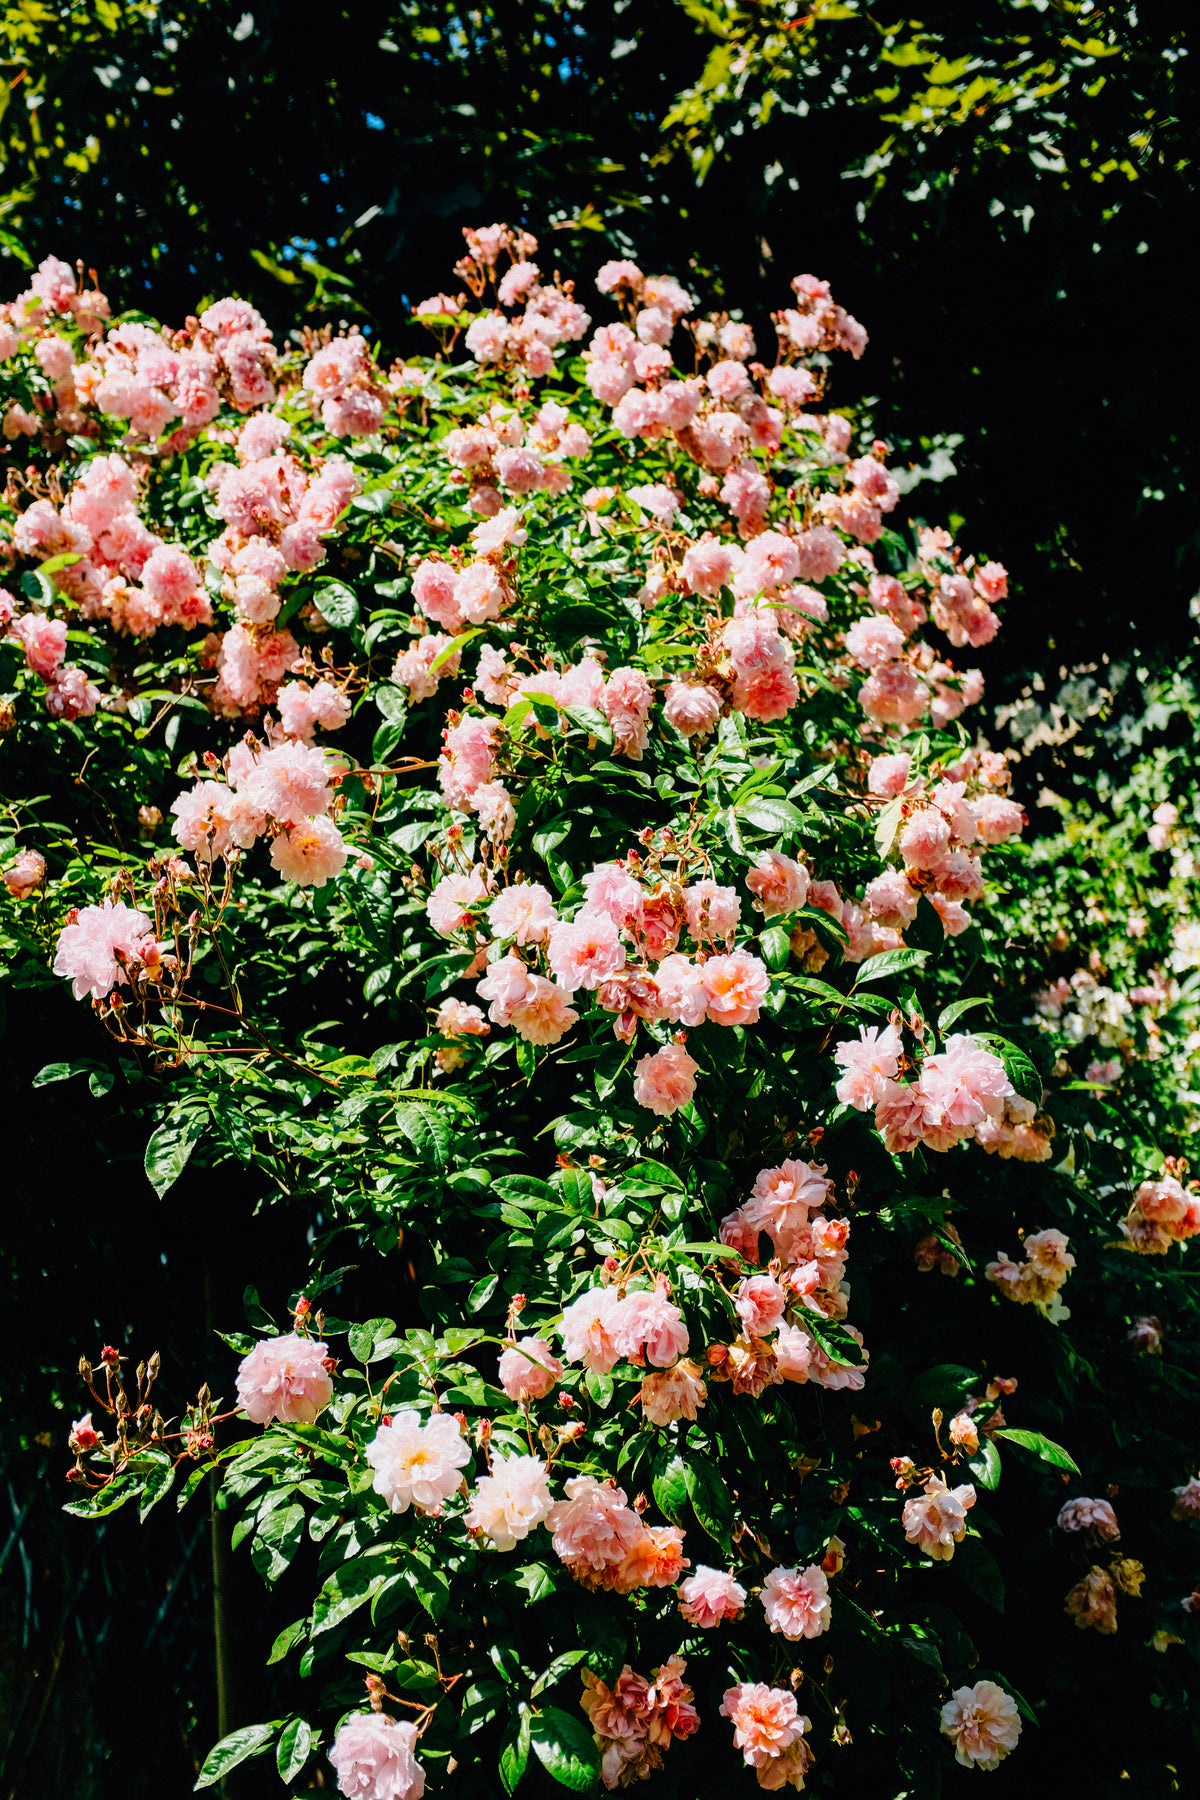 pink flowers and green leaves of a large bush